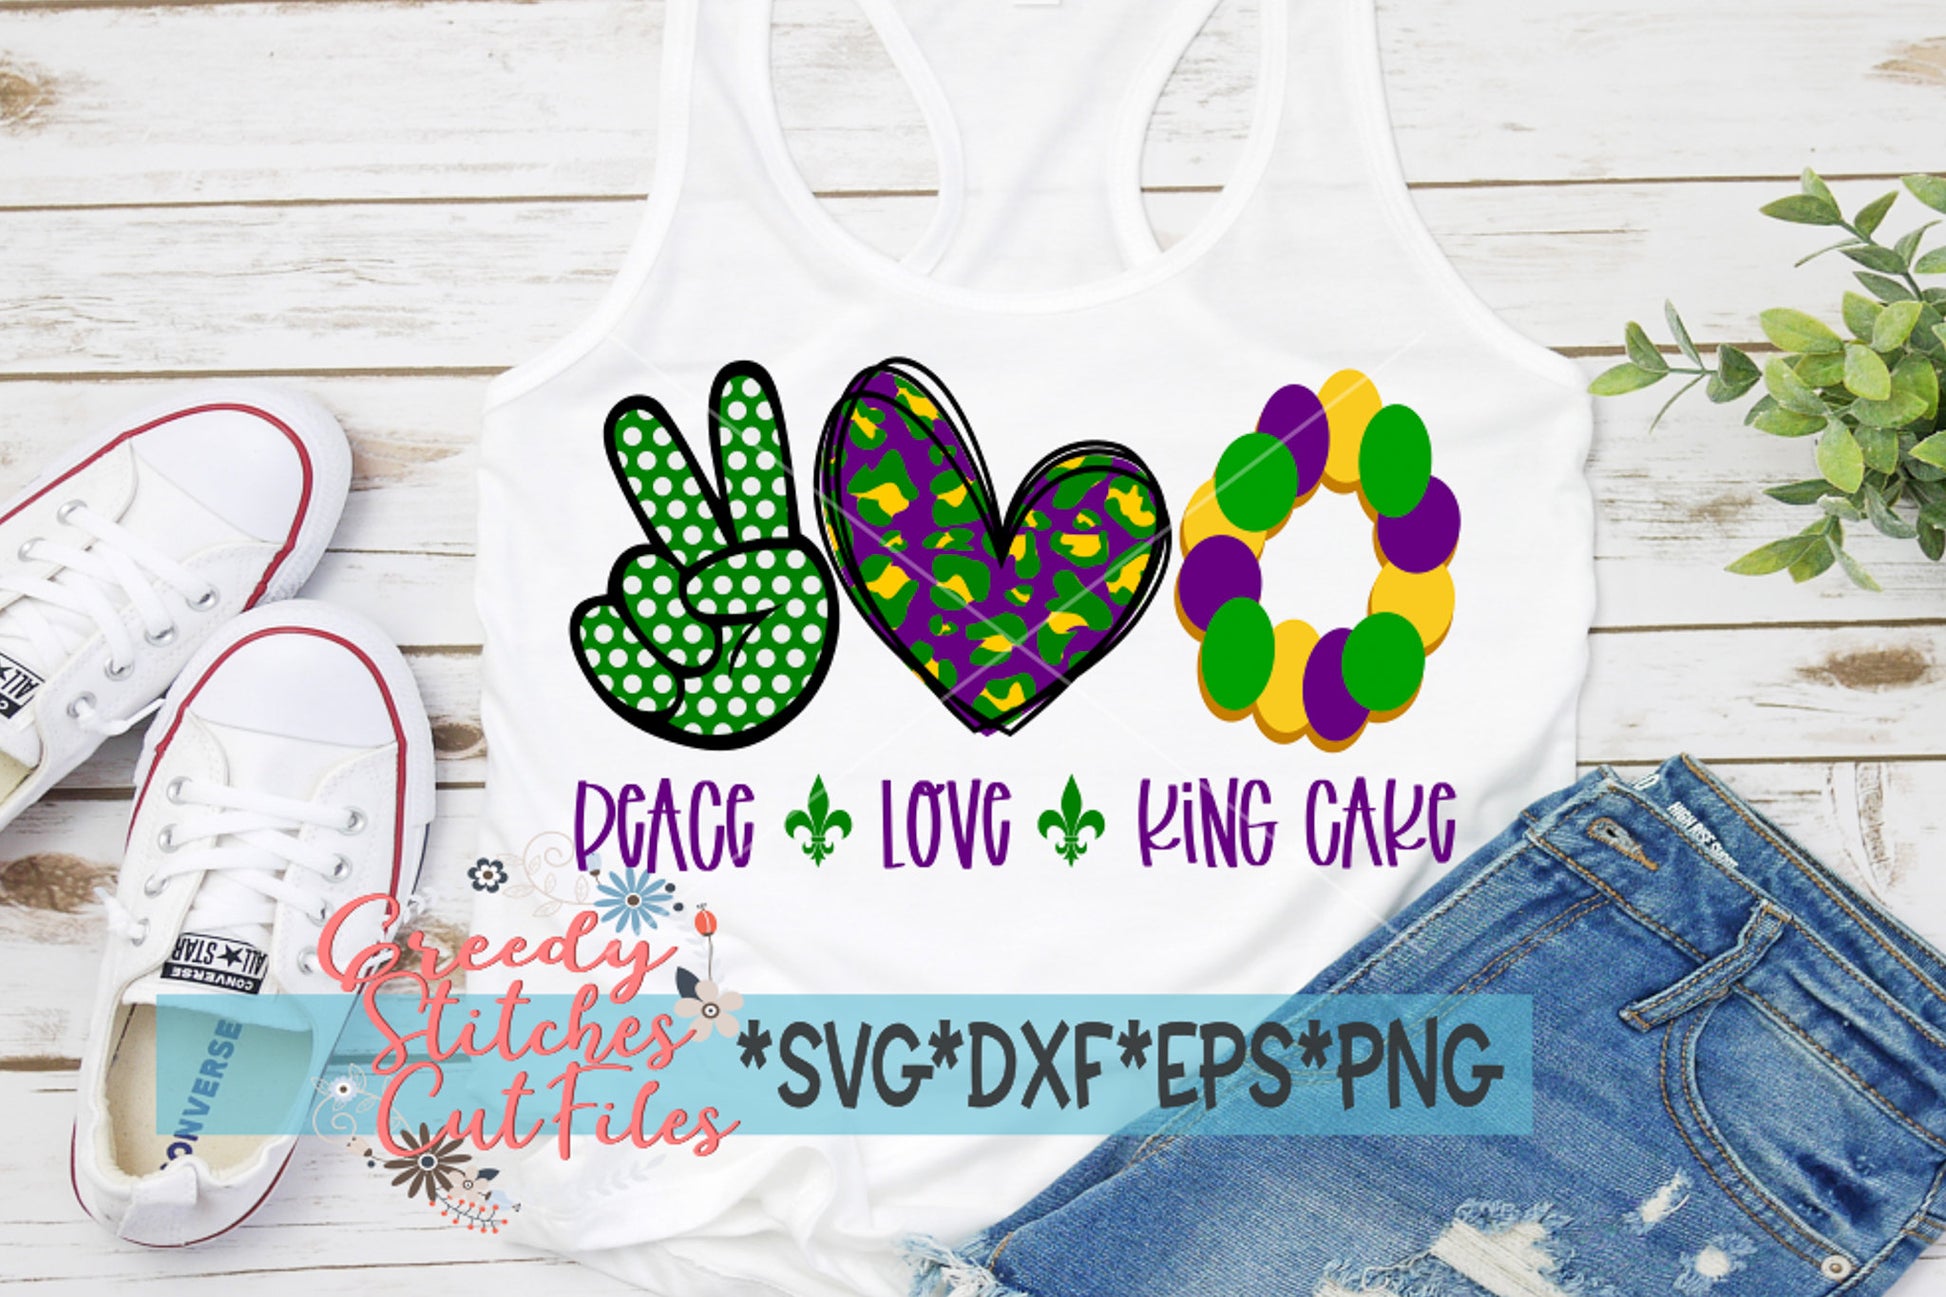 Peace Love King Cake svg, dxf, eps, png.  Mardi Gras SvG | Beads SVG | Mardi Gras SvG | King Cake SvG | Instant Download Cut Files.